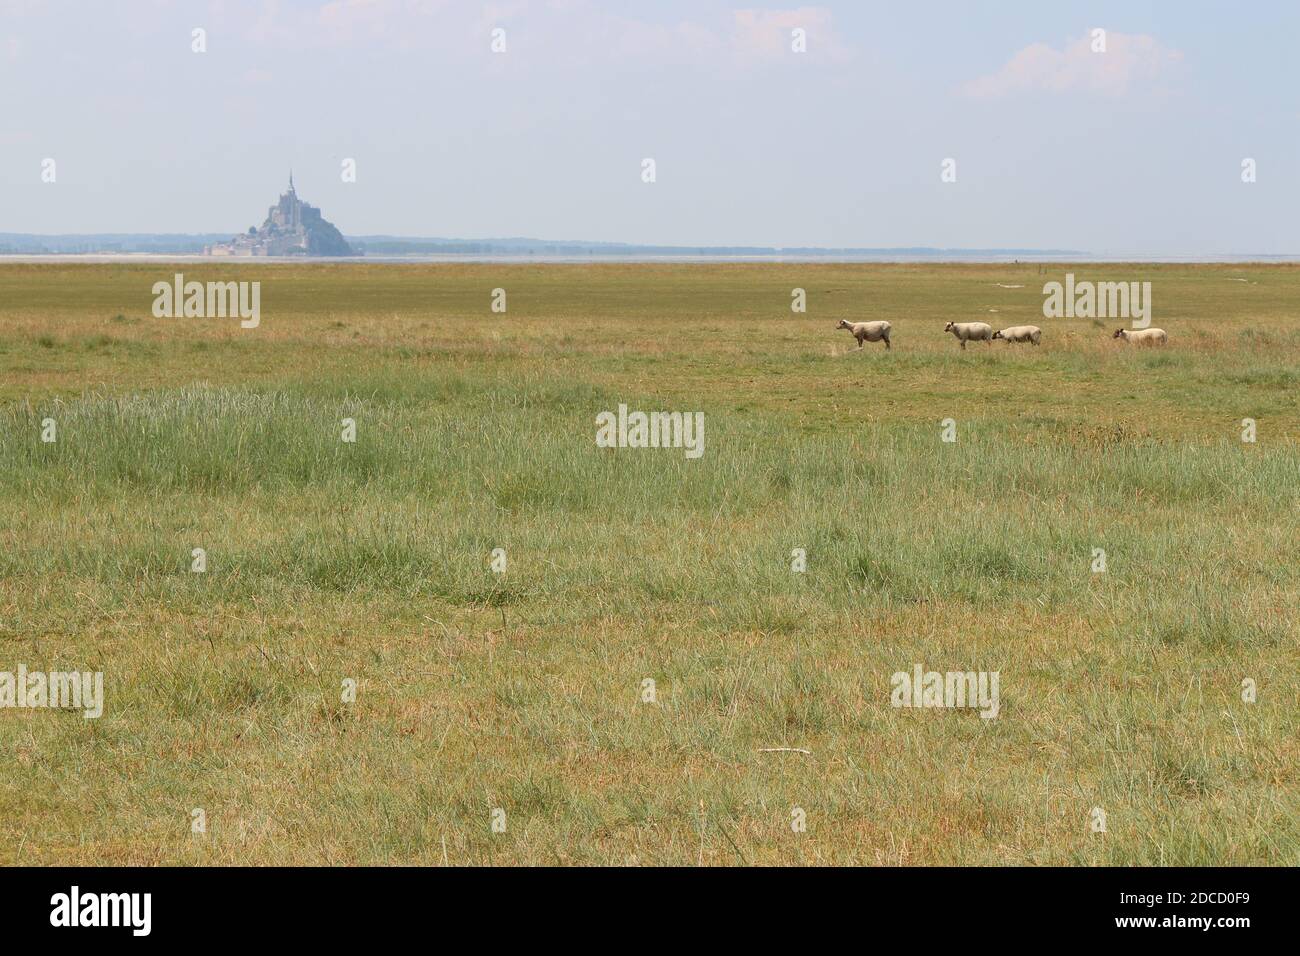 mont-saint-michel bay in normandy (france) Stock Photo